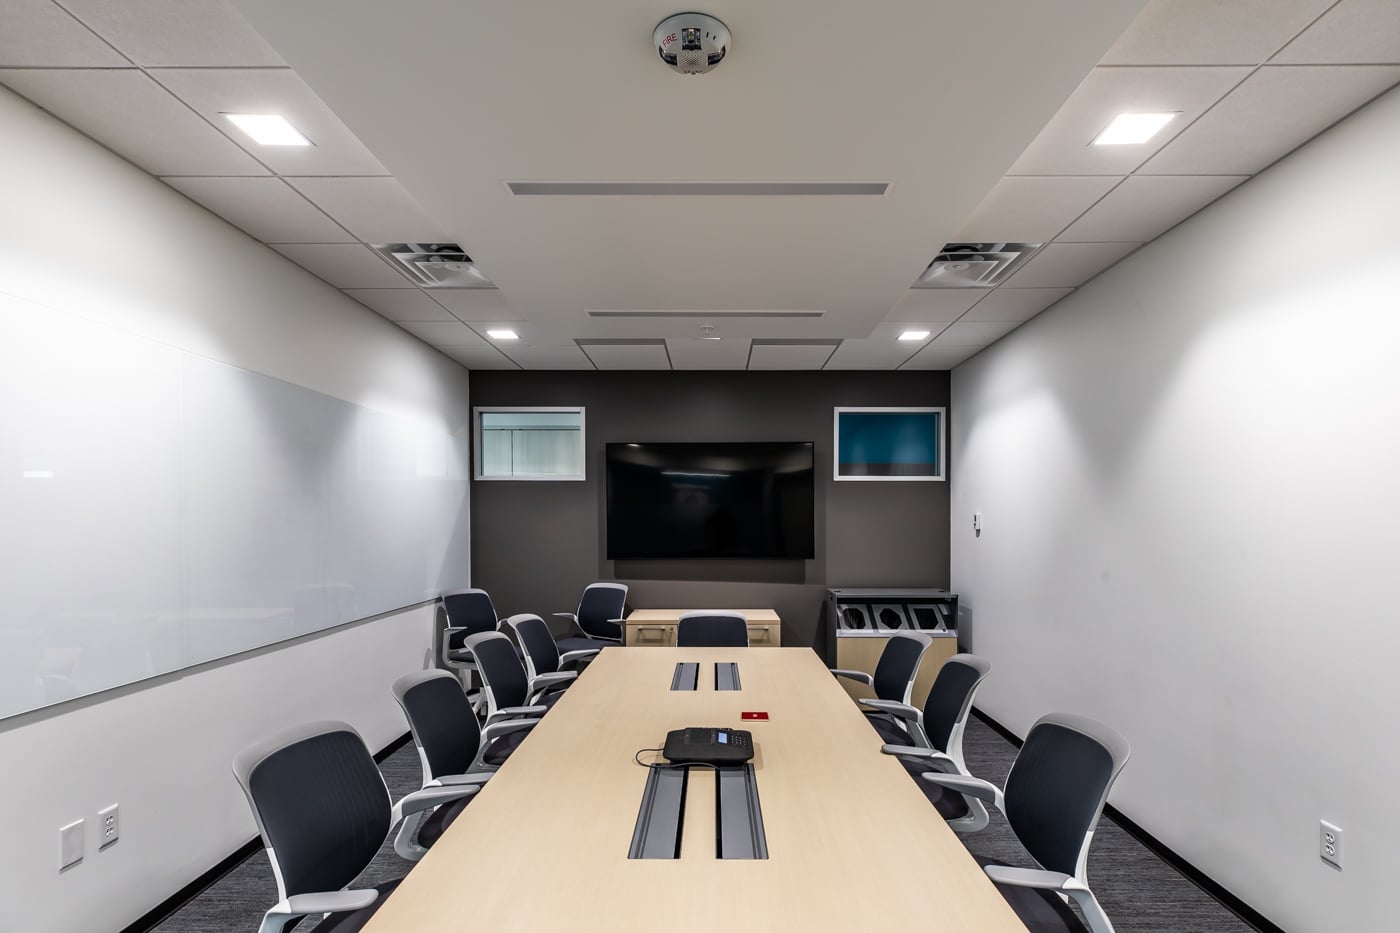 HDR conference room